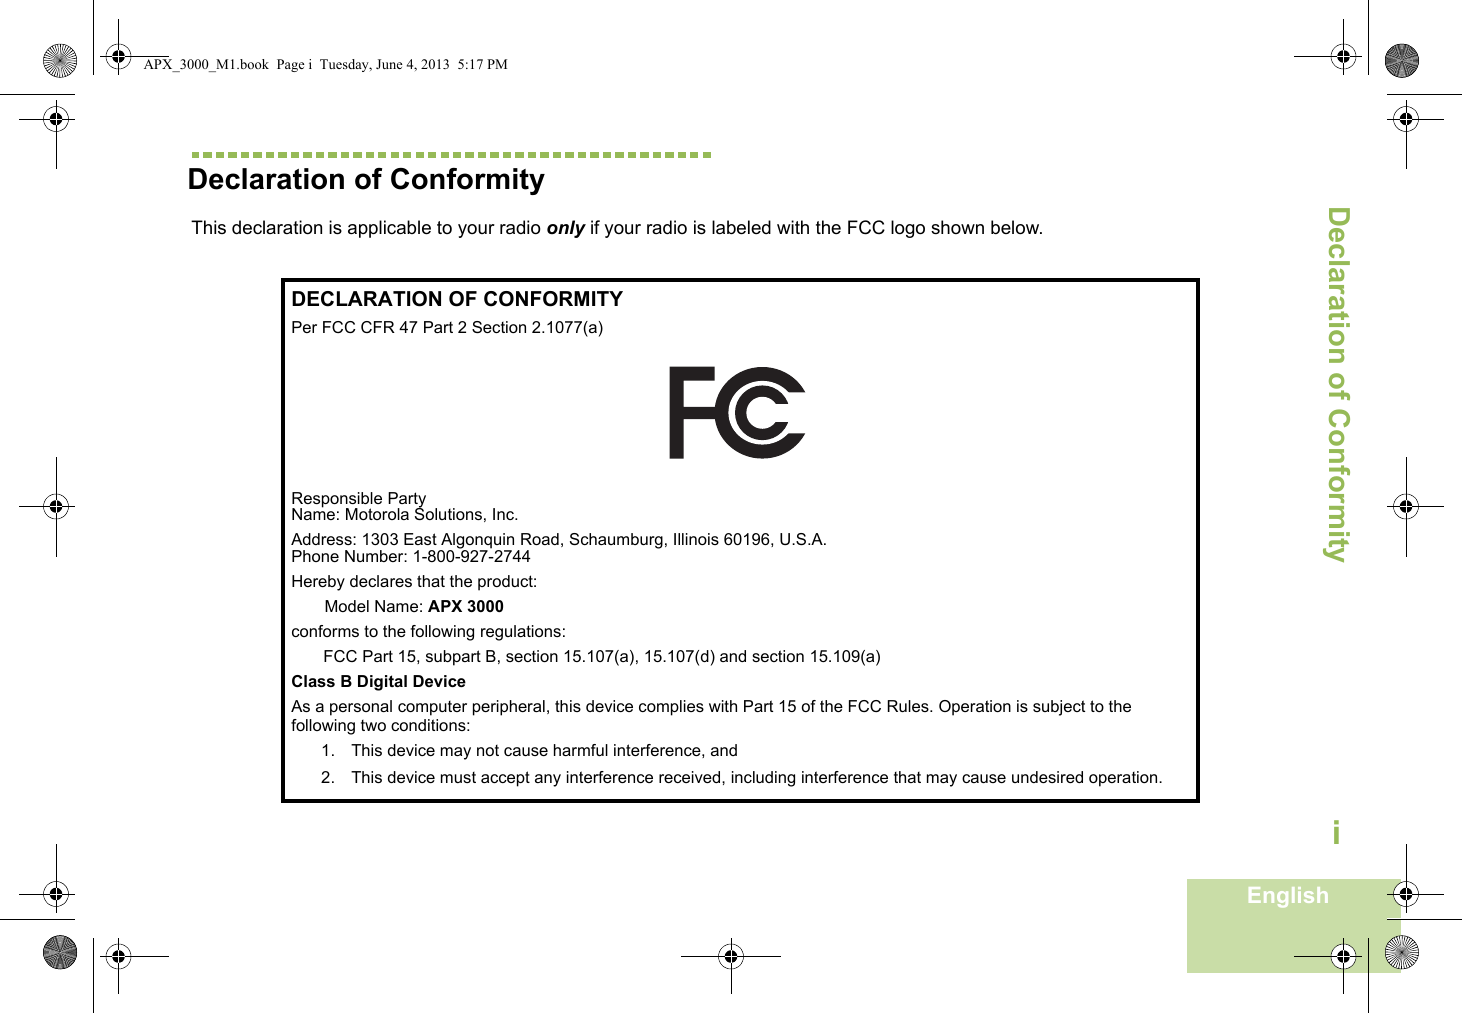 Declaration of ConformityEnglishiDeclaration of Conformity  This declaration is applicable to your radio only if your radio is labeled with the FCC logo shown below.DECLARATION OF CONFORMITYPer FCC CFR 47 Part 2 Section 2.1077(a)Responsible Party Name: Motorola Solutions, Inc.Address: 1303 East Algonquin Road, Schaumburg, Illinois 60196, U.S.A.Phone Number: 1-800-927-2744Hereby declares that the product:Model Name: APX 3000conforms to the following regulations:FCC Part 15, subpart B, section 15.107(a), 15.107(d) and section 15.109(a)Class B Digital DeviceAs a personal computer peripheral, this device complies with Part 15 of the FCC Rules. Operation is subject to the following two conditions:1. This device may not cause harmful interference, and 2. This device must accept any interference received, including interference that may cause undesired operation.APX_3000_M1.book  Page i  Tuesday, June 4, 2013  5:17 PM